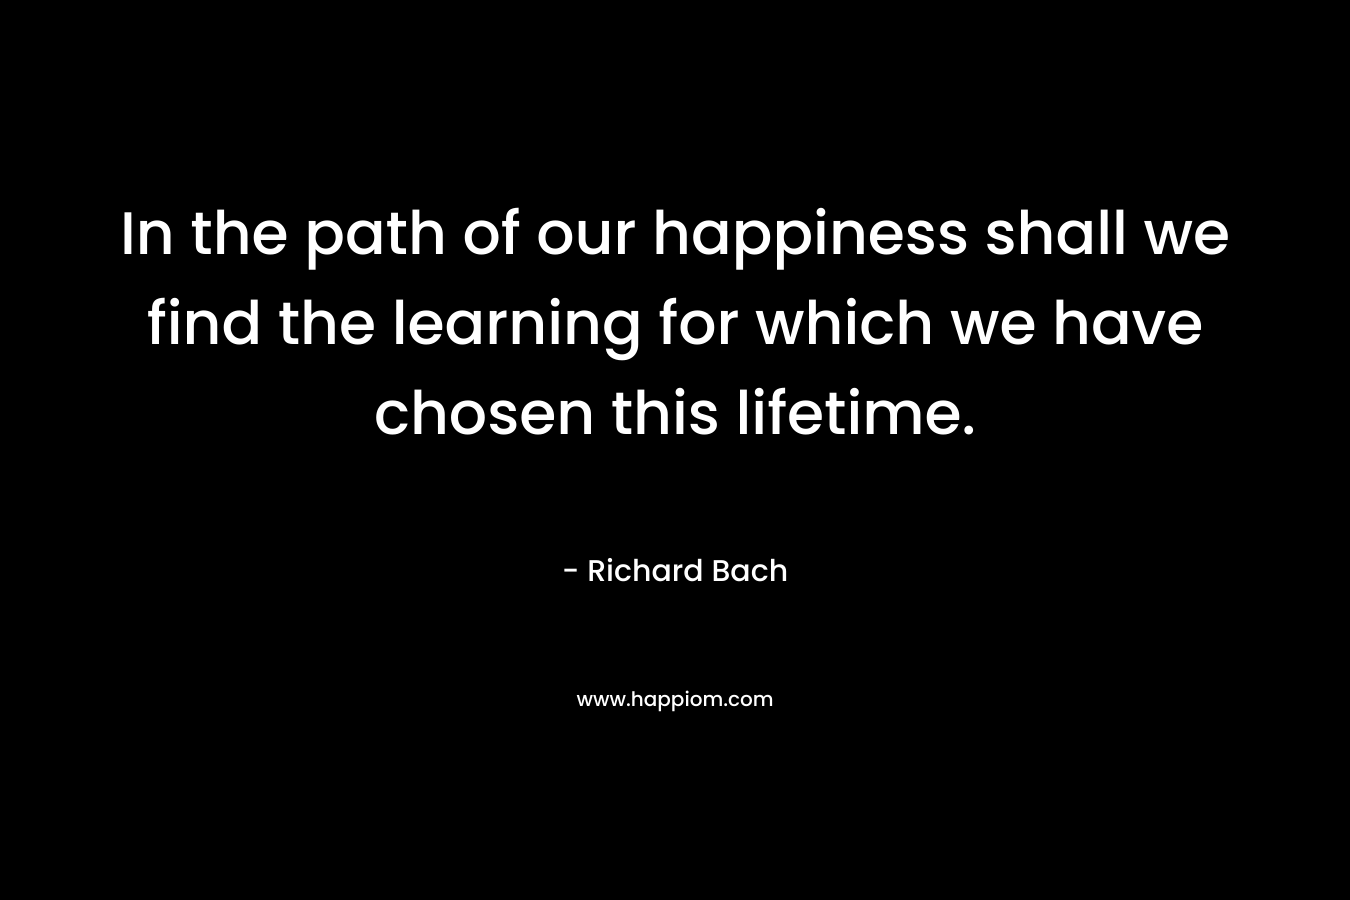 In the path of our happiness shall we find the learning for which we have chosen this lifetime.